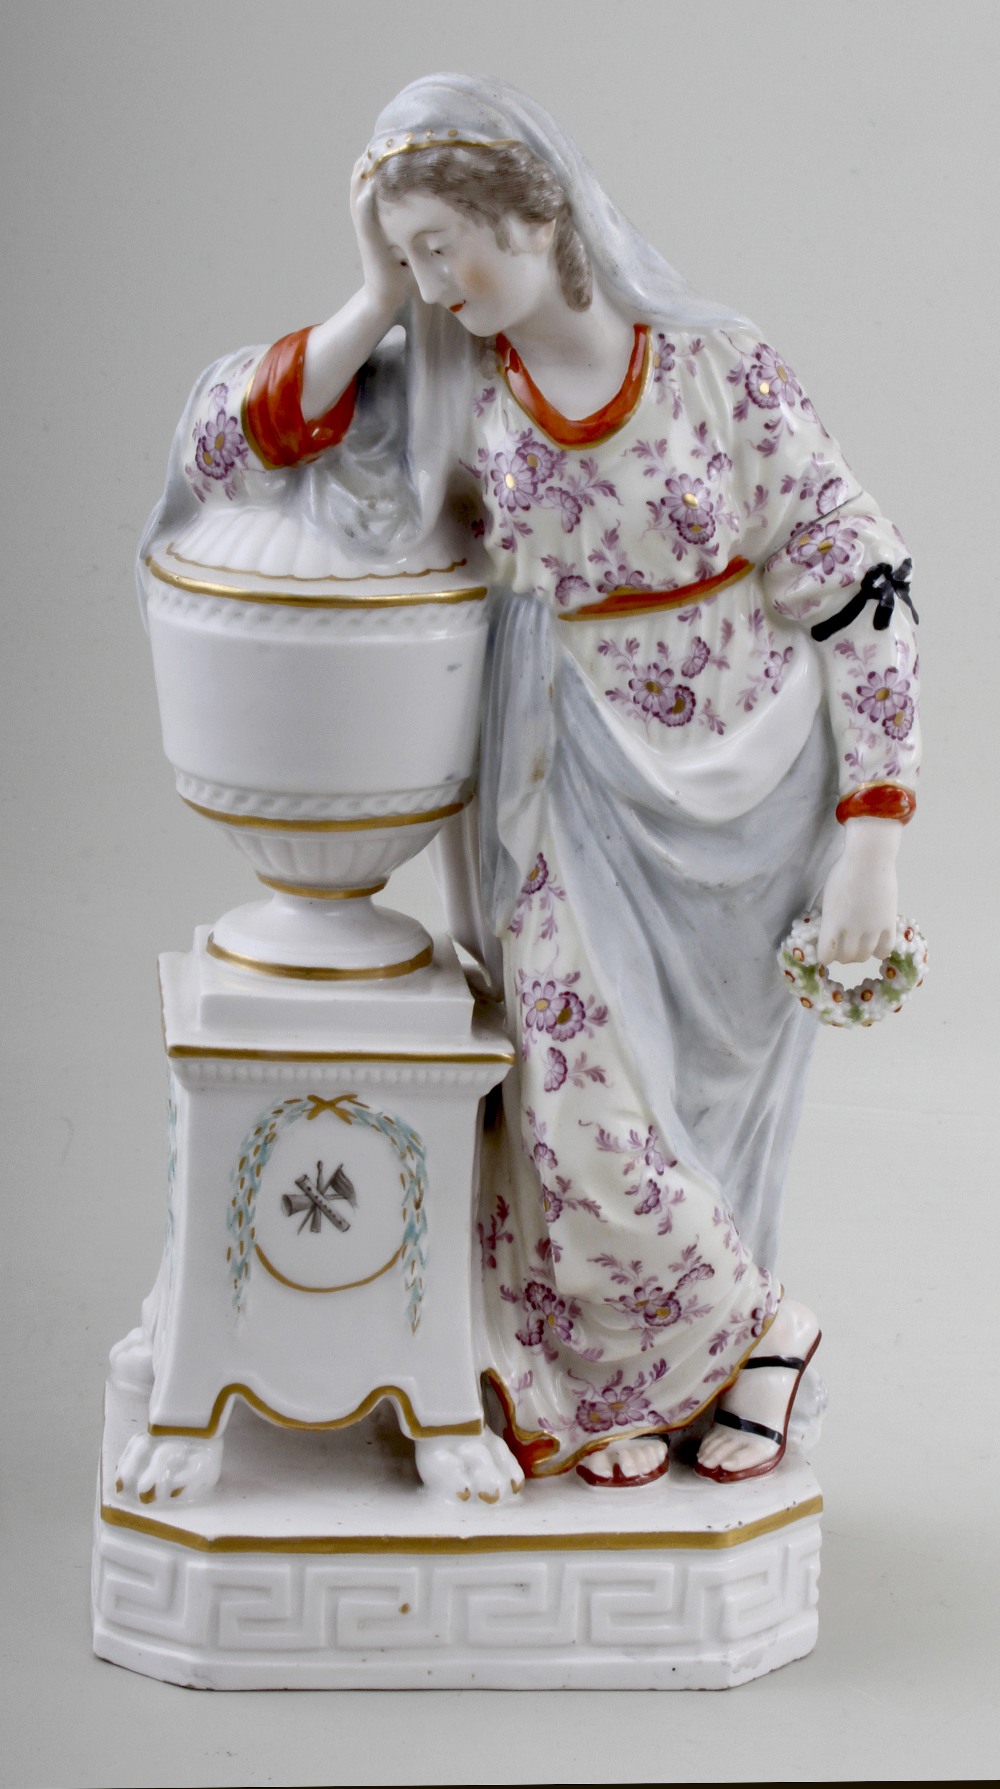 A Derby porcelain figure of Andromache, c.1780, standing with wreath in hand near the funerary urn